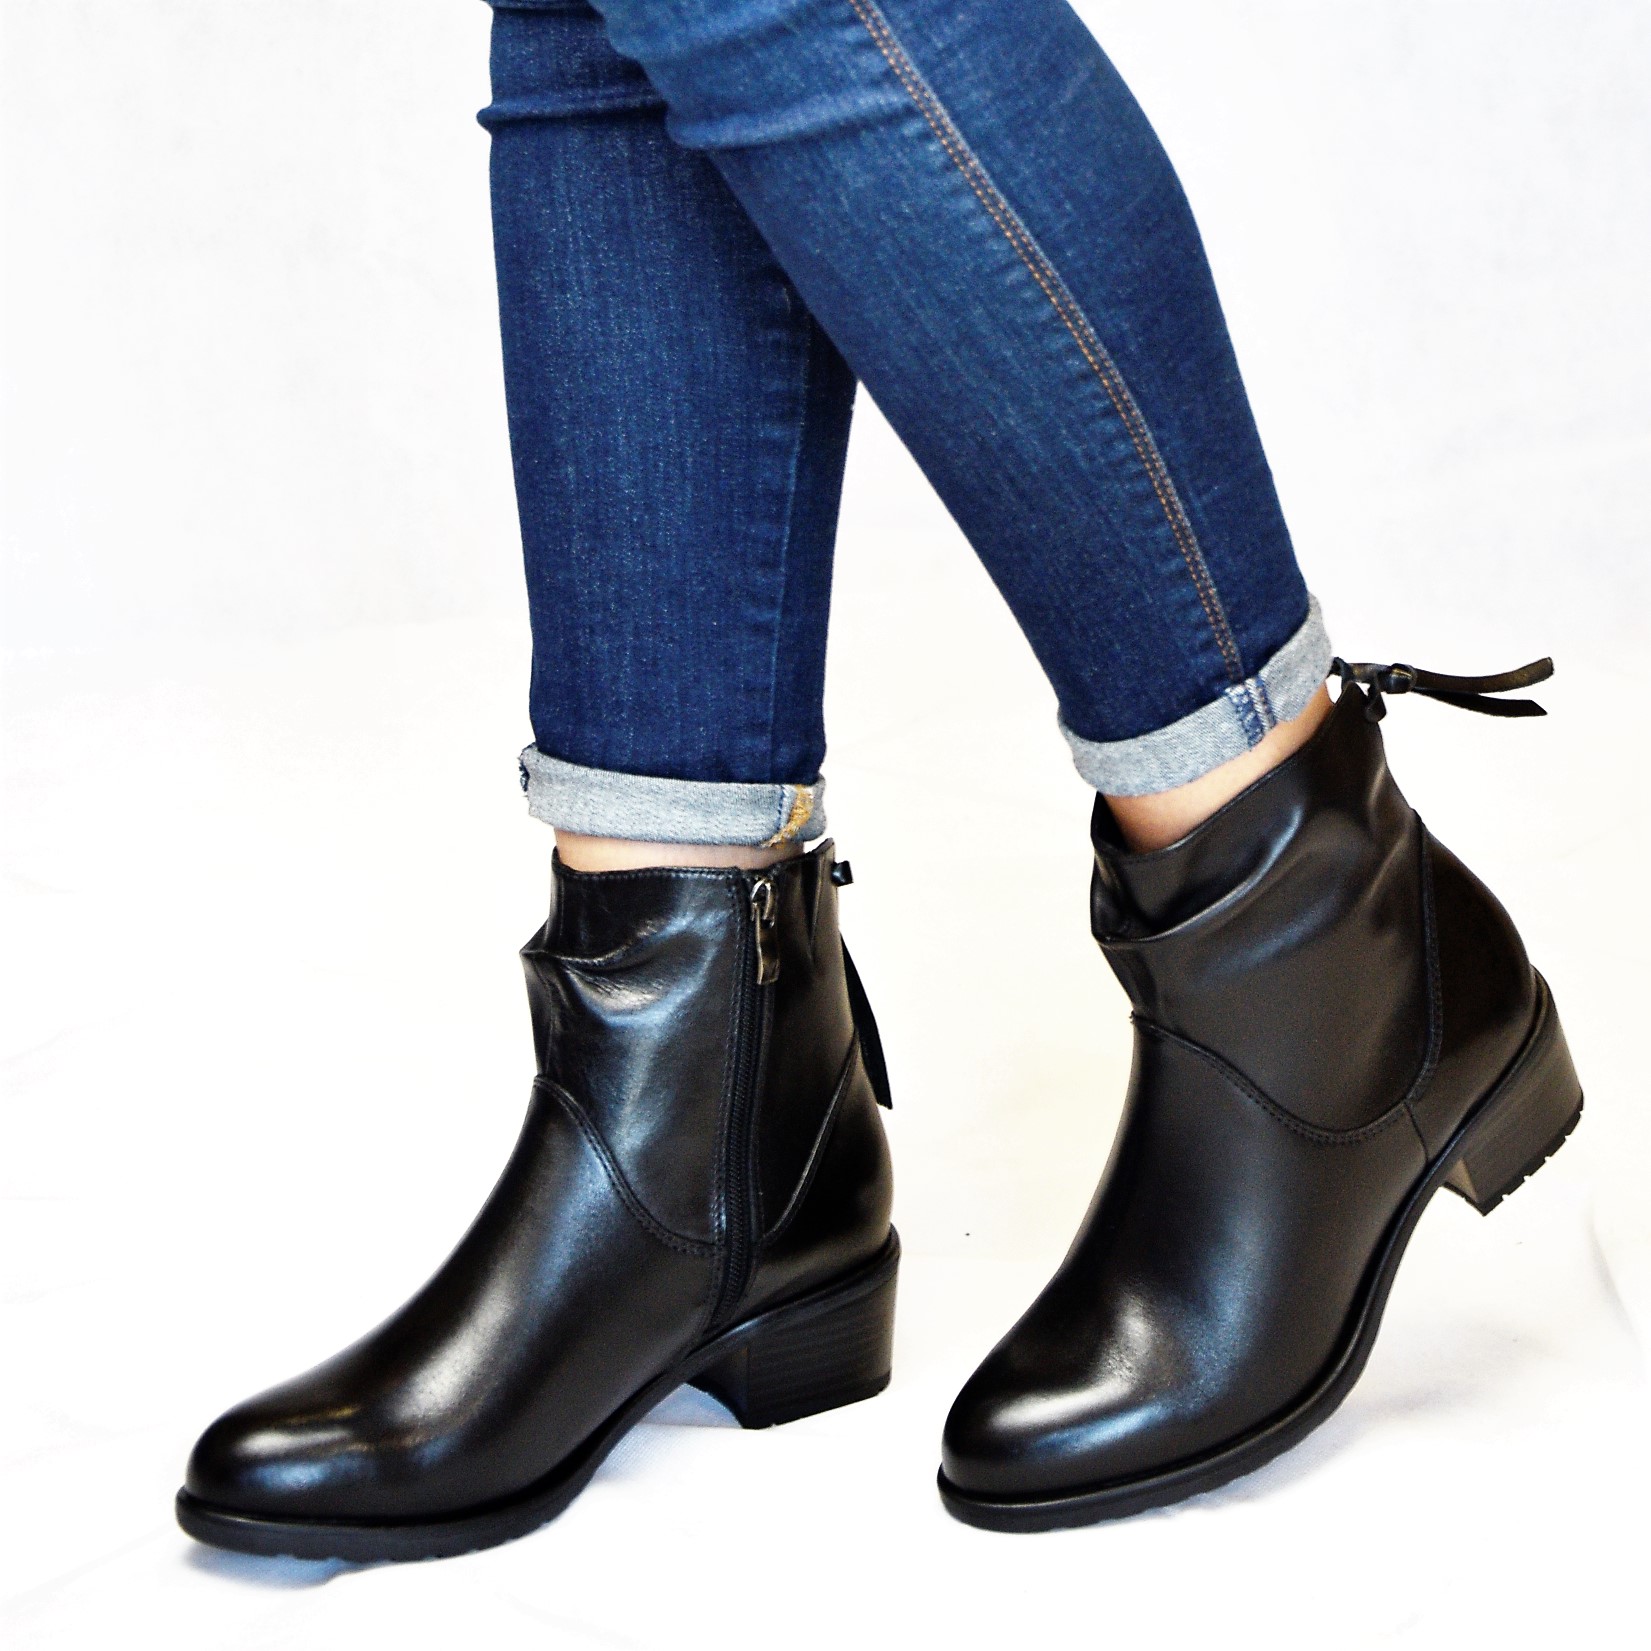 CAPRICE ANKLE BOOTS WITH HEEL AND ZIP 